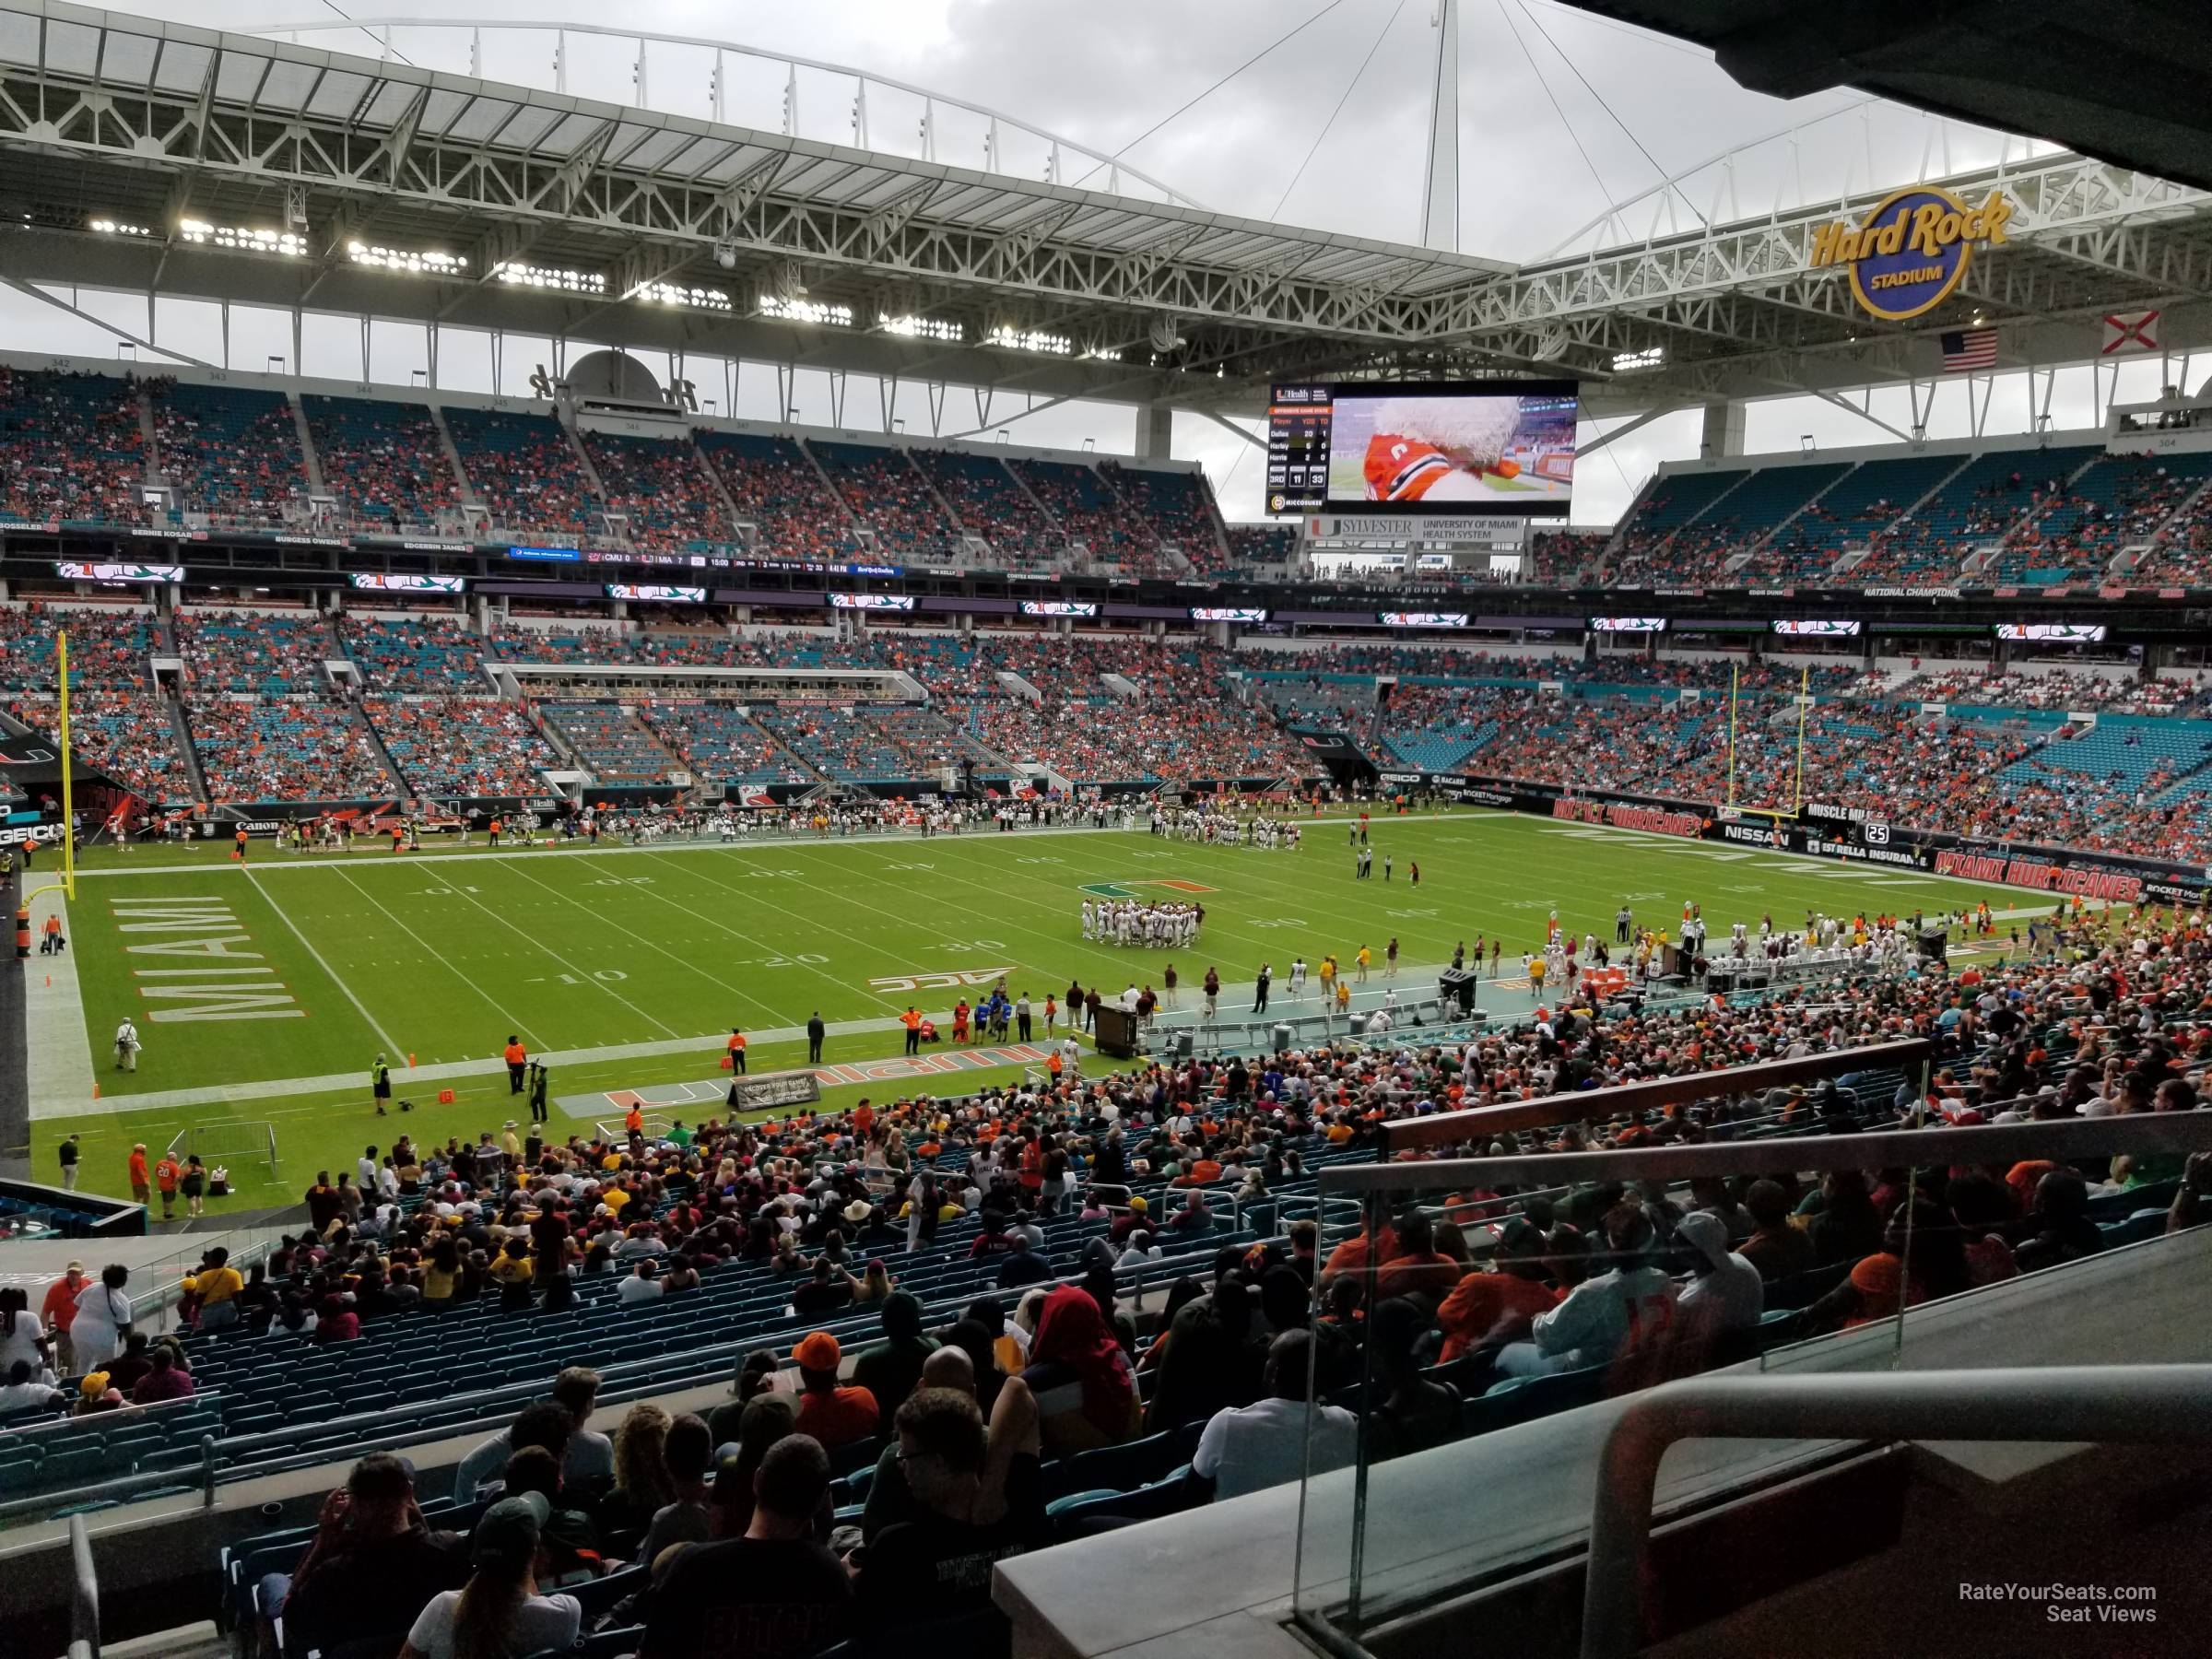 section 223, row 10 seat view  for football - hard rock stadium